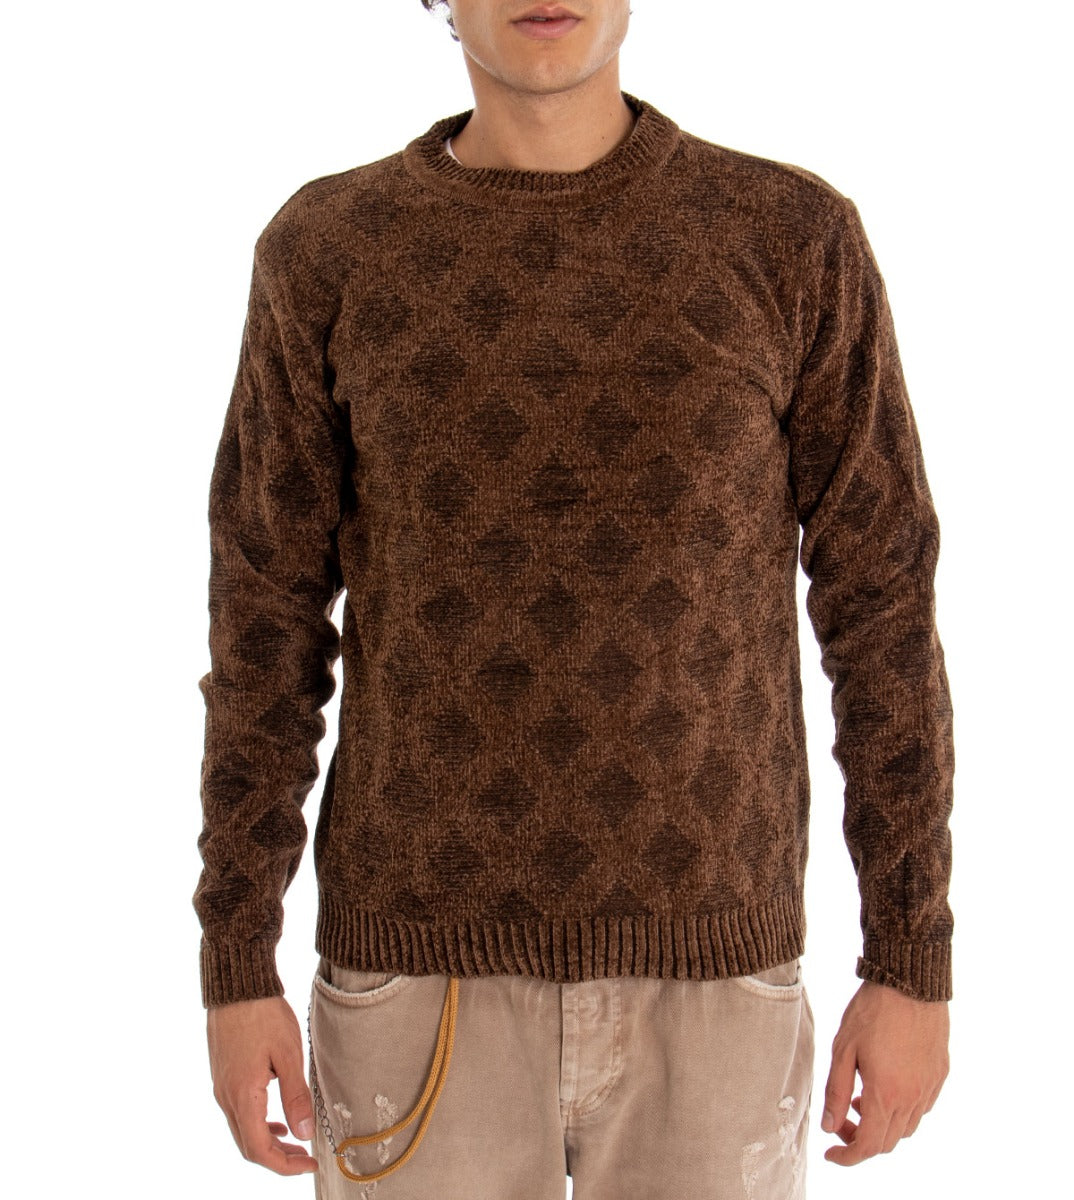 Men's Round Neck Sweater Solid Color Brown Diamonds Long Sleeves GIOSAL